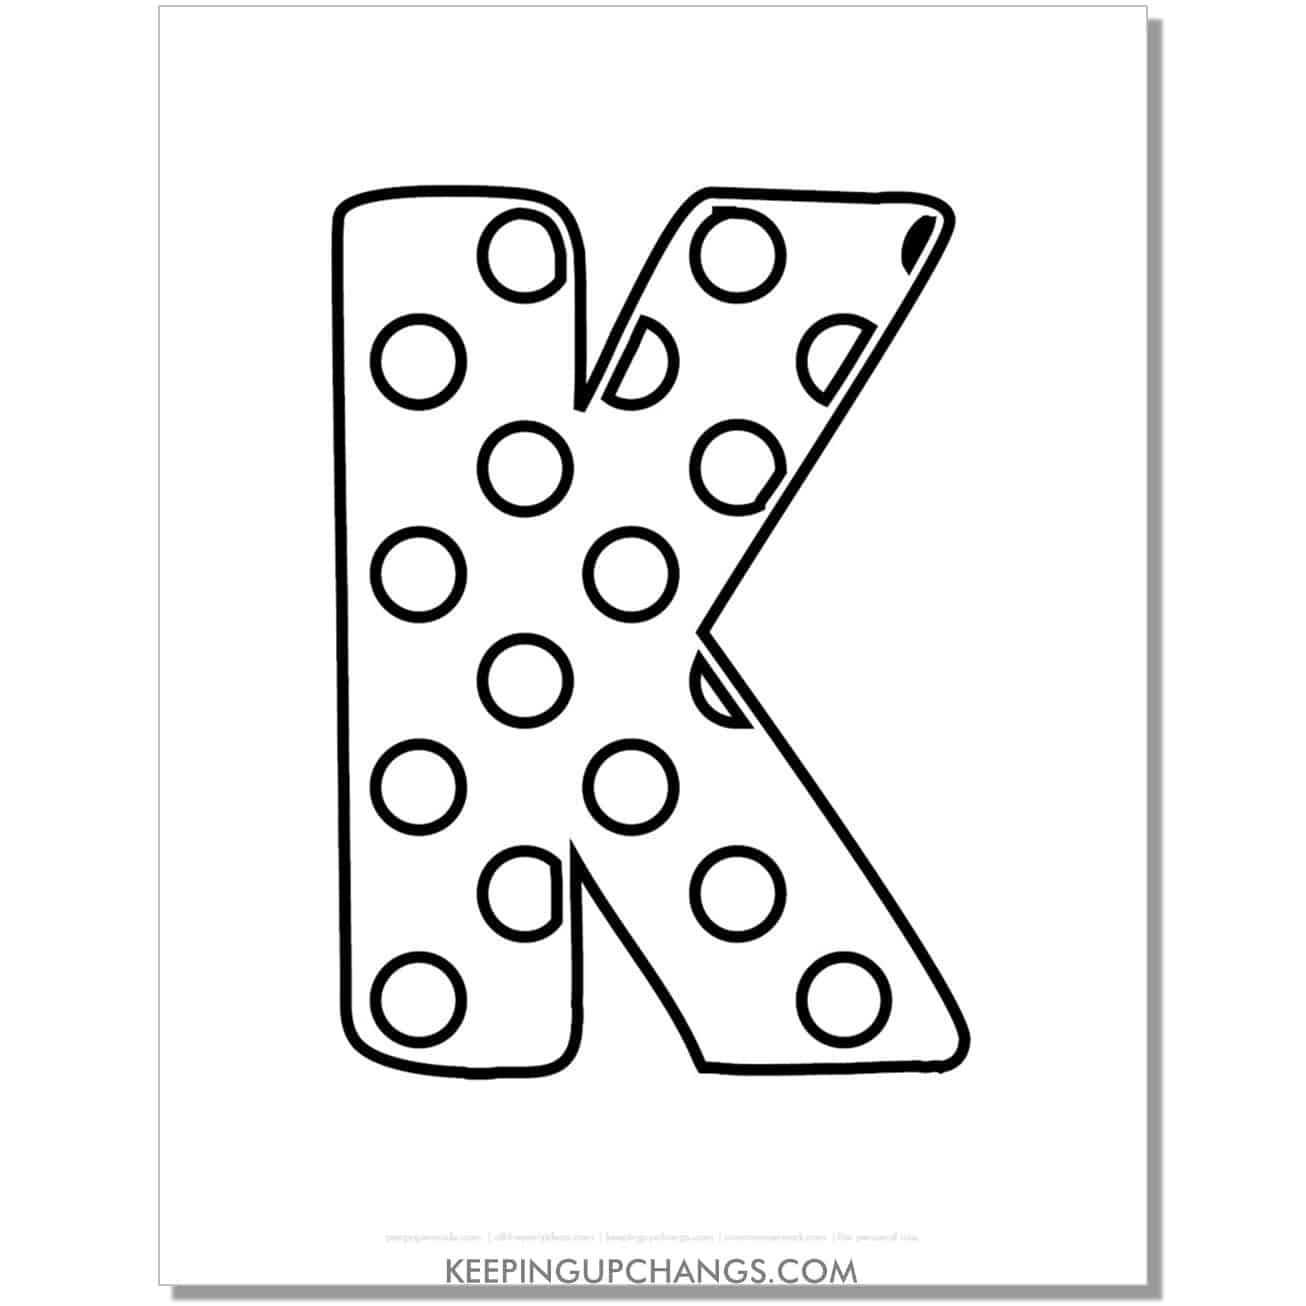 free alphabet letter k coloring page with polka dots for toddlers, preschool, kindergarten.